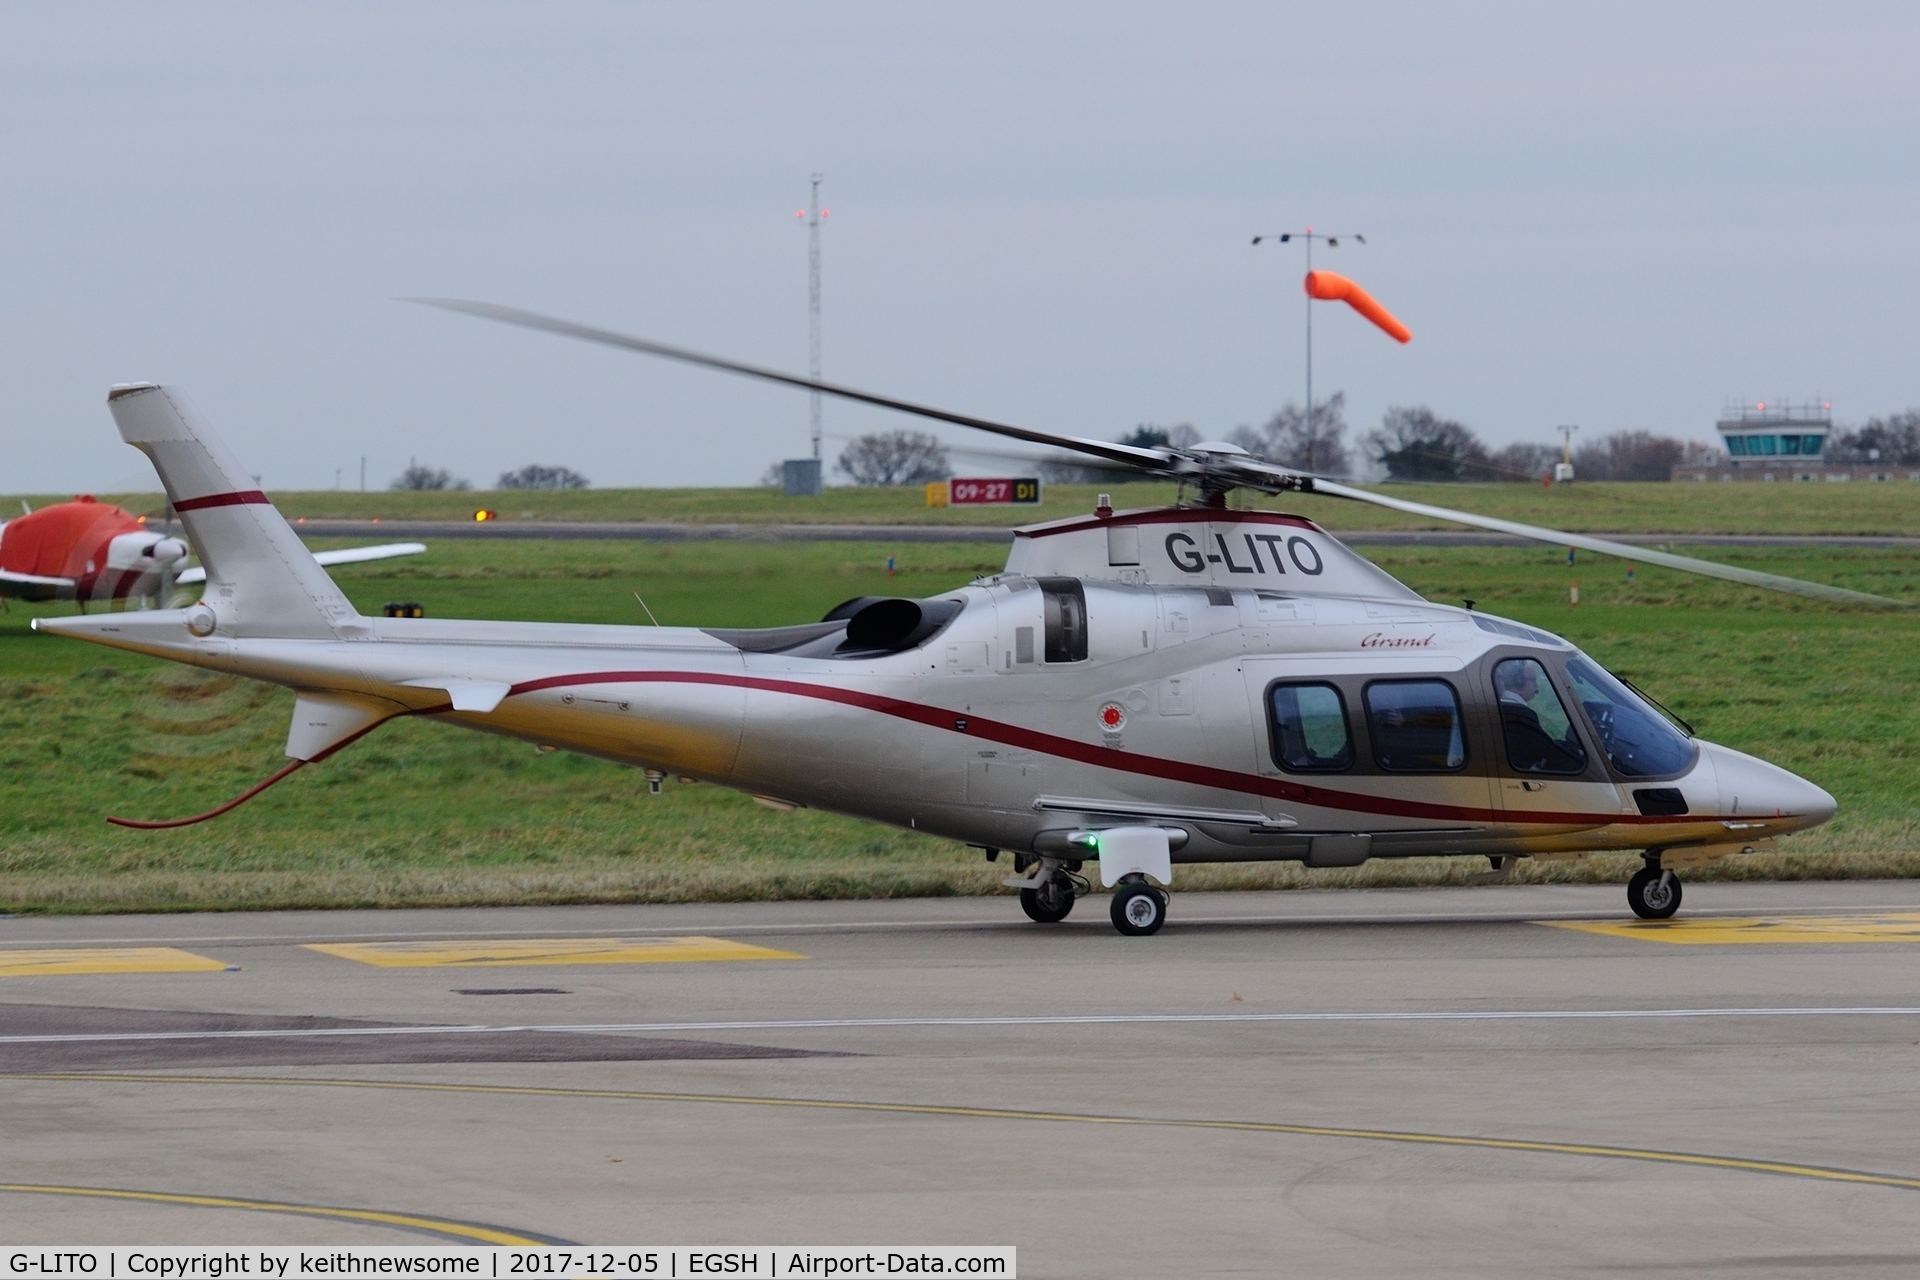 G-LITO, 2006 Agusta A109S Grand C/N 22015, Welcome return visitor.